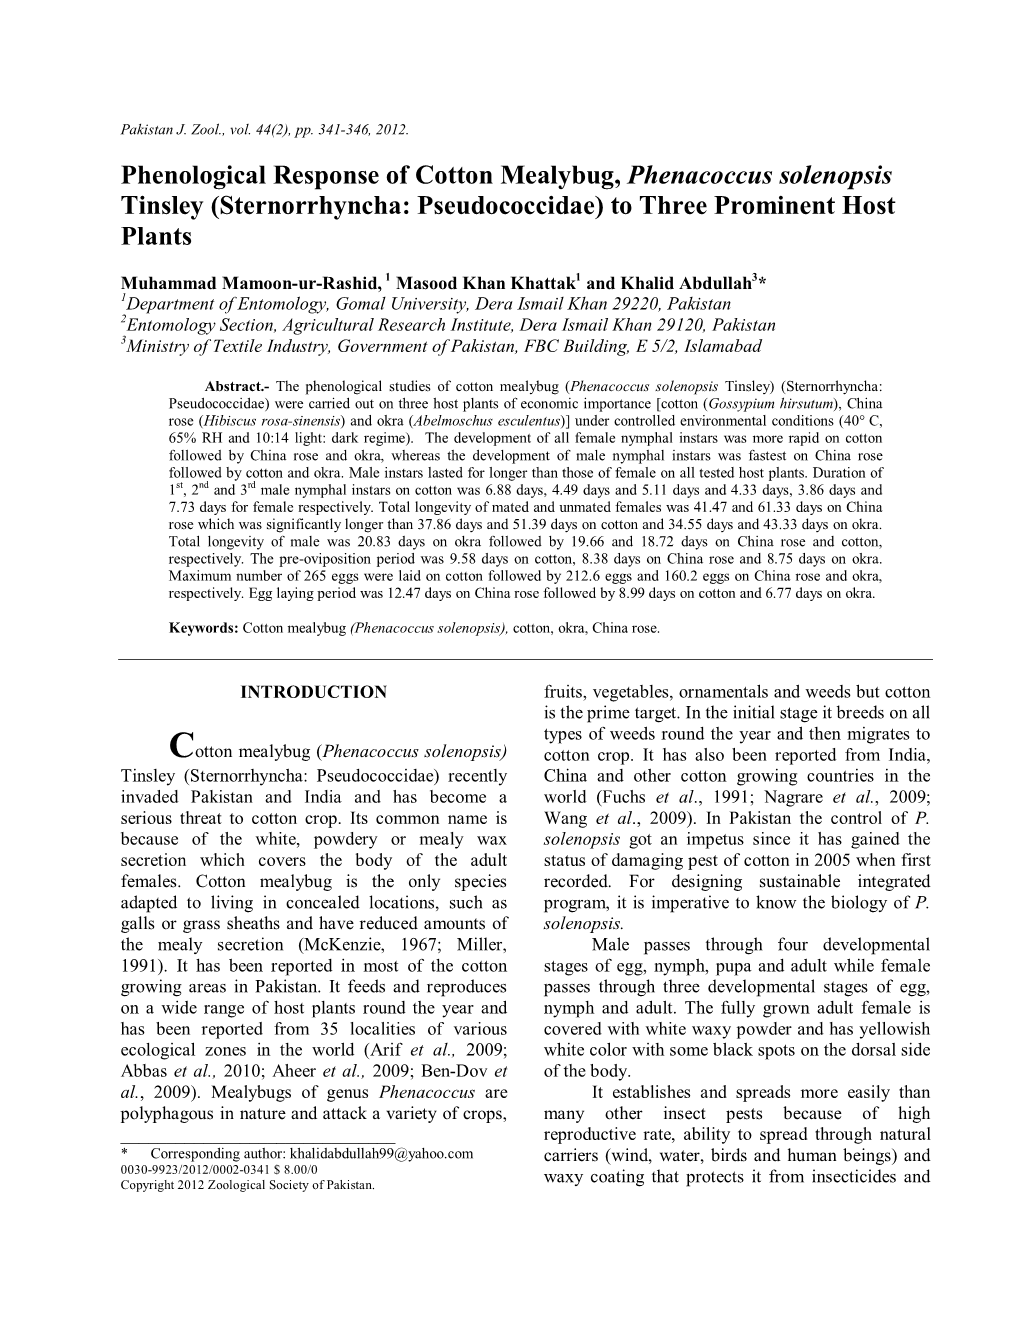 Phenological Response of Cotton Mealybug, Phenacoccus Solenopsis Tinsley (Sternorrhyncha: Pseudococcidae) to Three Prominent Host Plants